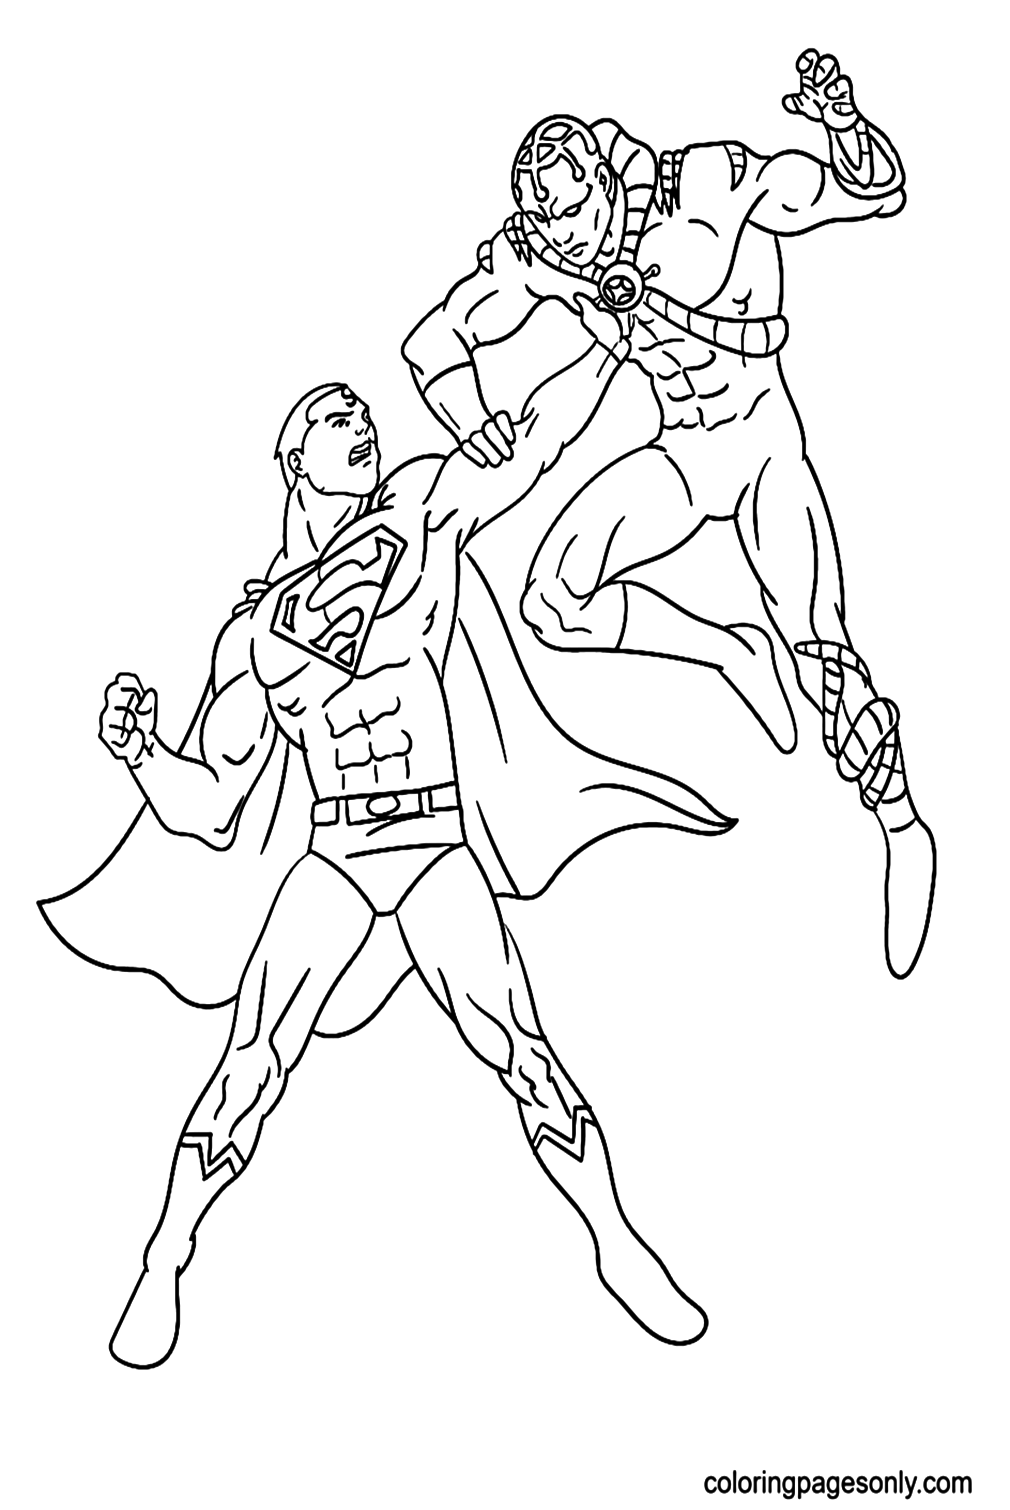 Superman Fighting Enemy Coloring Pages